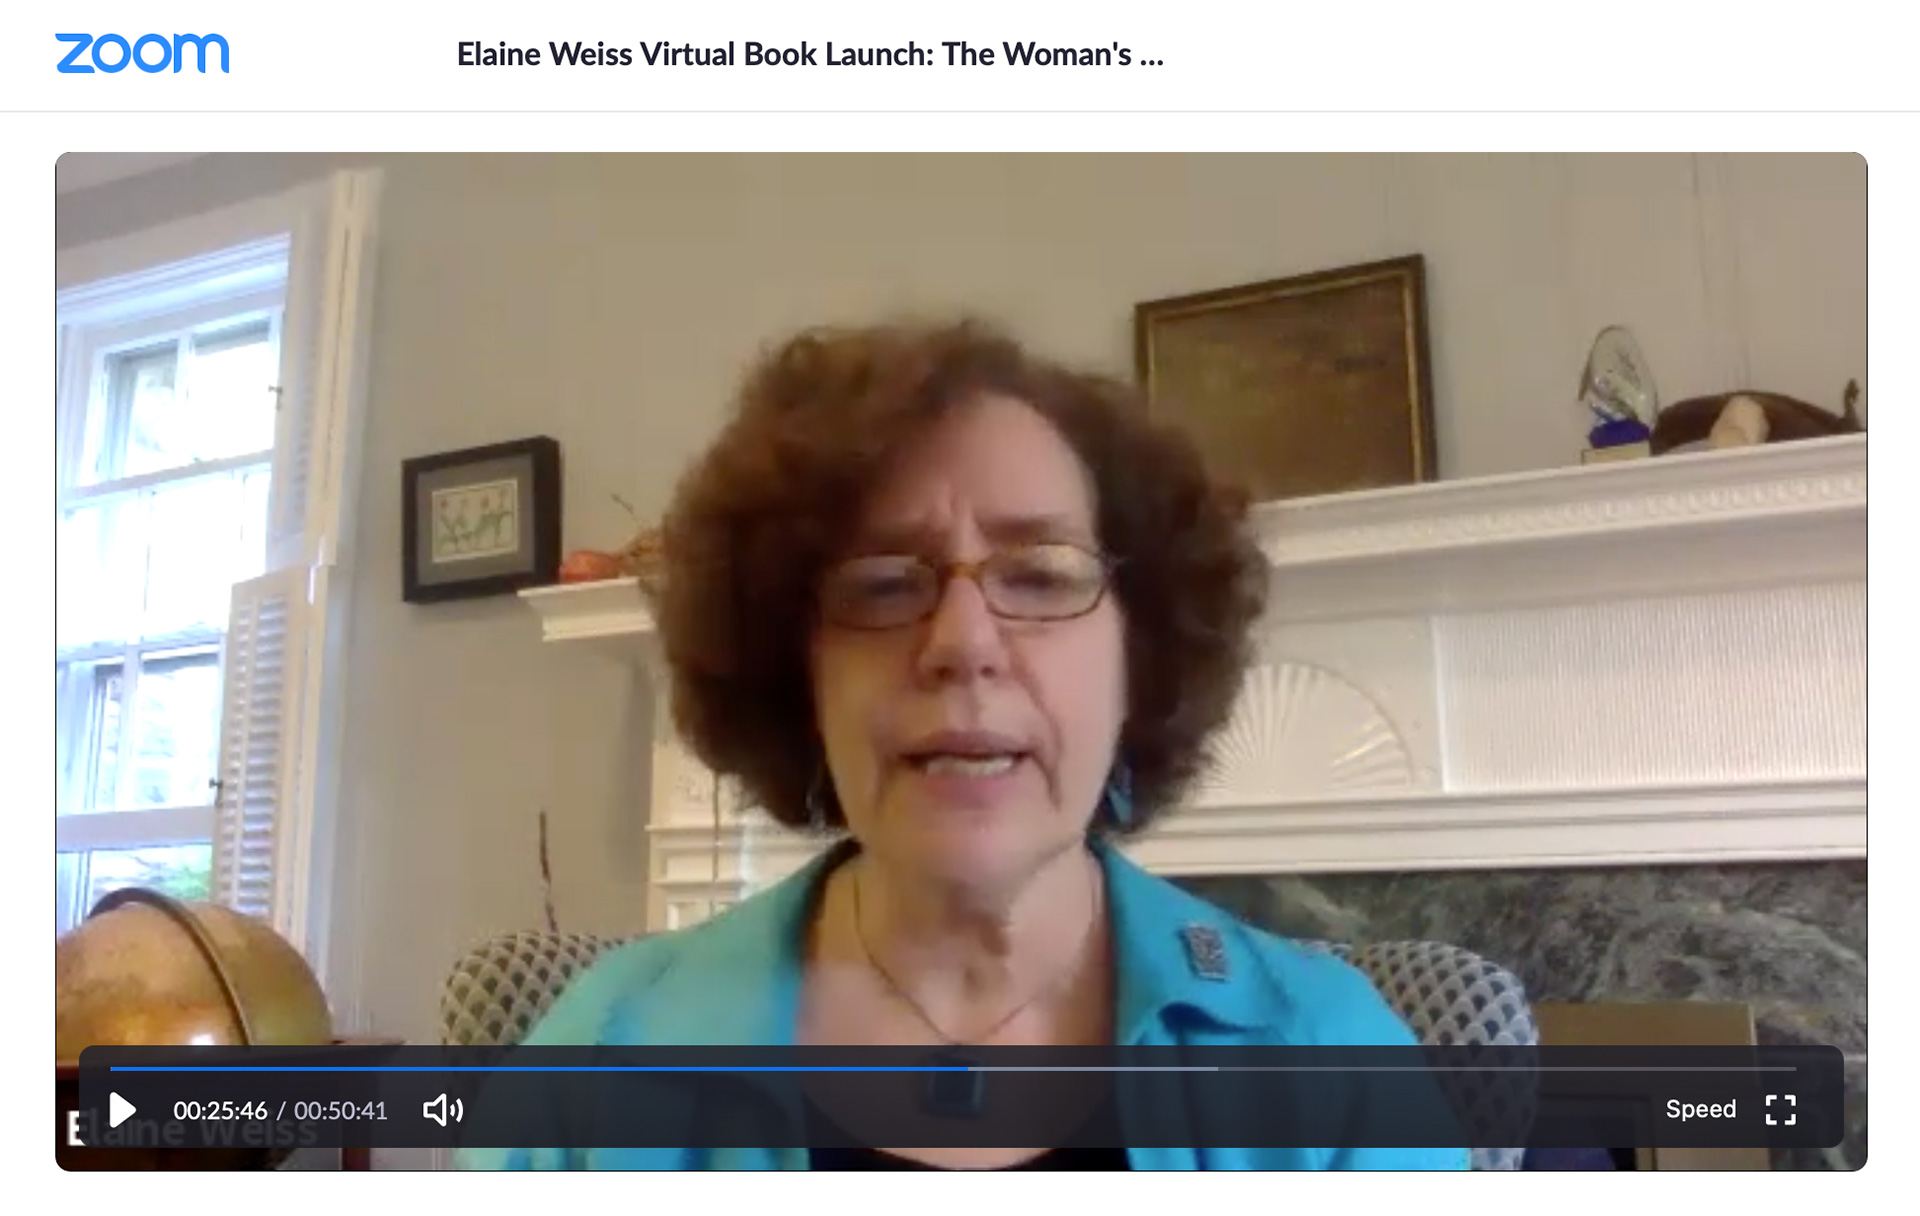 Elaine Weiss virtual book launch for The Woman's Hour, Young Reader's edition via Zoom.